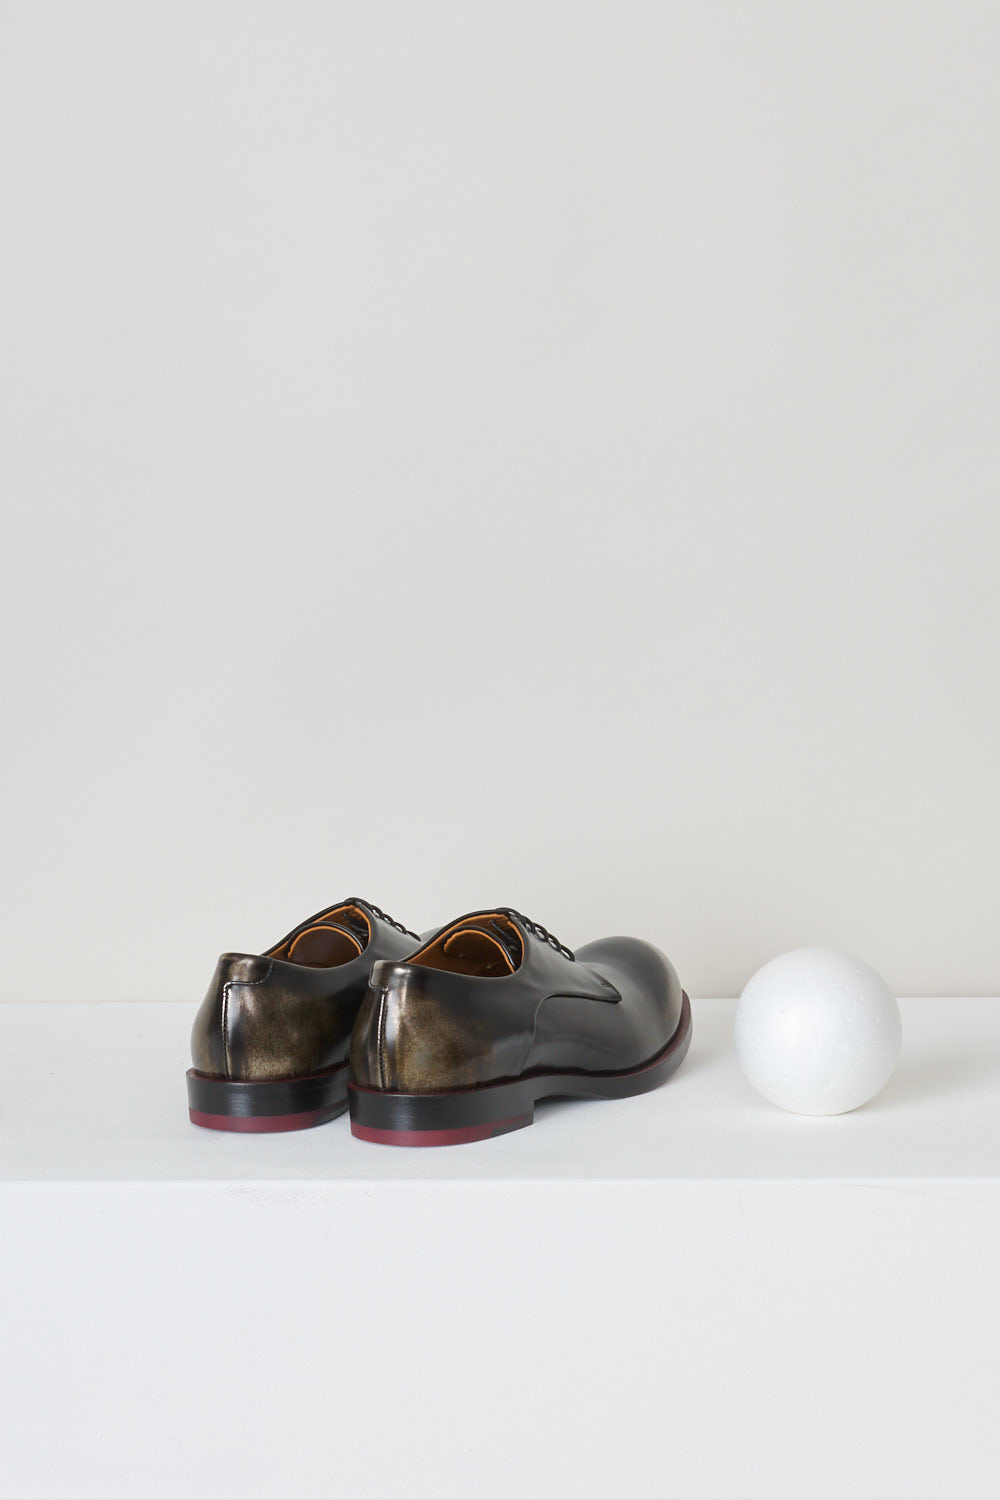 Jil Sander, Black derby shoes with silver and red accents, JS23018_1ASZ17_keope_tric_089, black, red, silver, back, Derby shoes in black with a silver heel and toes, and with red accents on the sole. 